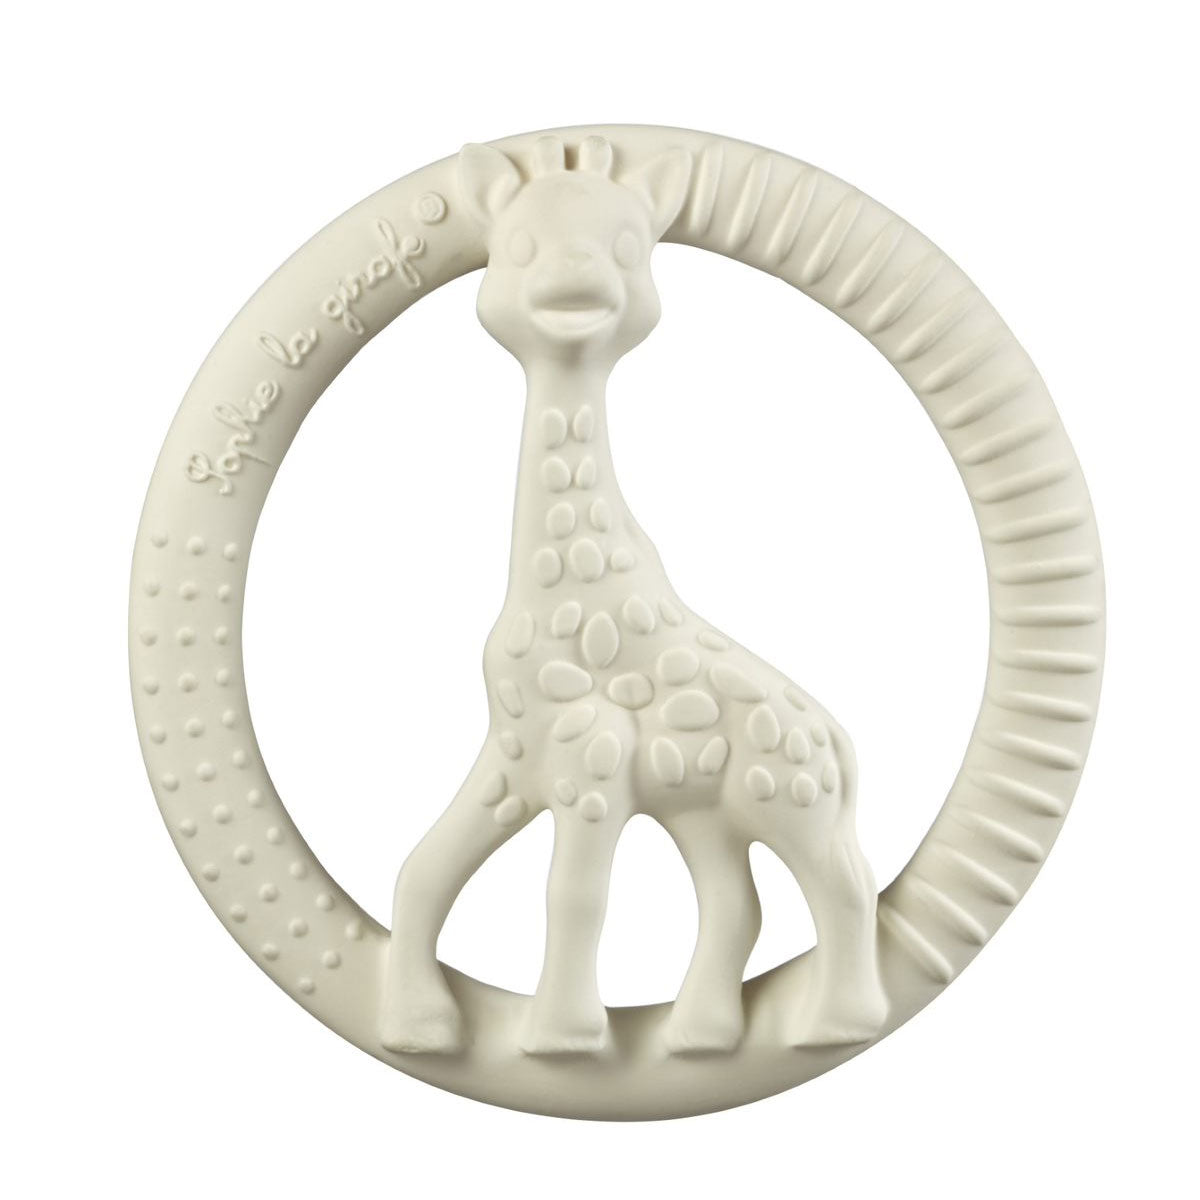 A ring teether for babies made from 100% natural rubber.  Featuring several soft parts to chew on and a variety of textures, this product offers variou massage options that effectively soothe baby's sore gums.  Lightweight and ergonomic, this teether easy easy for little hands to hold!